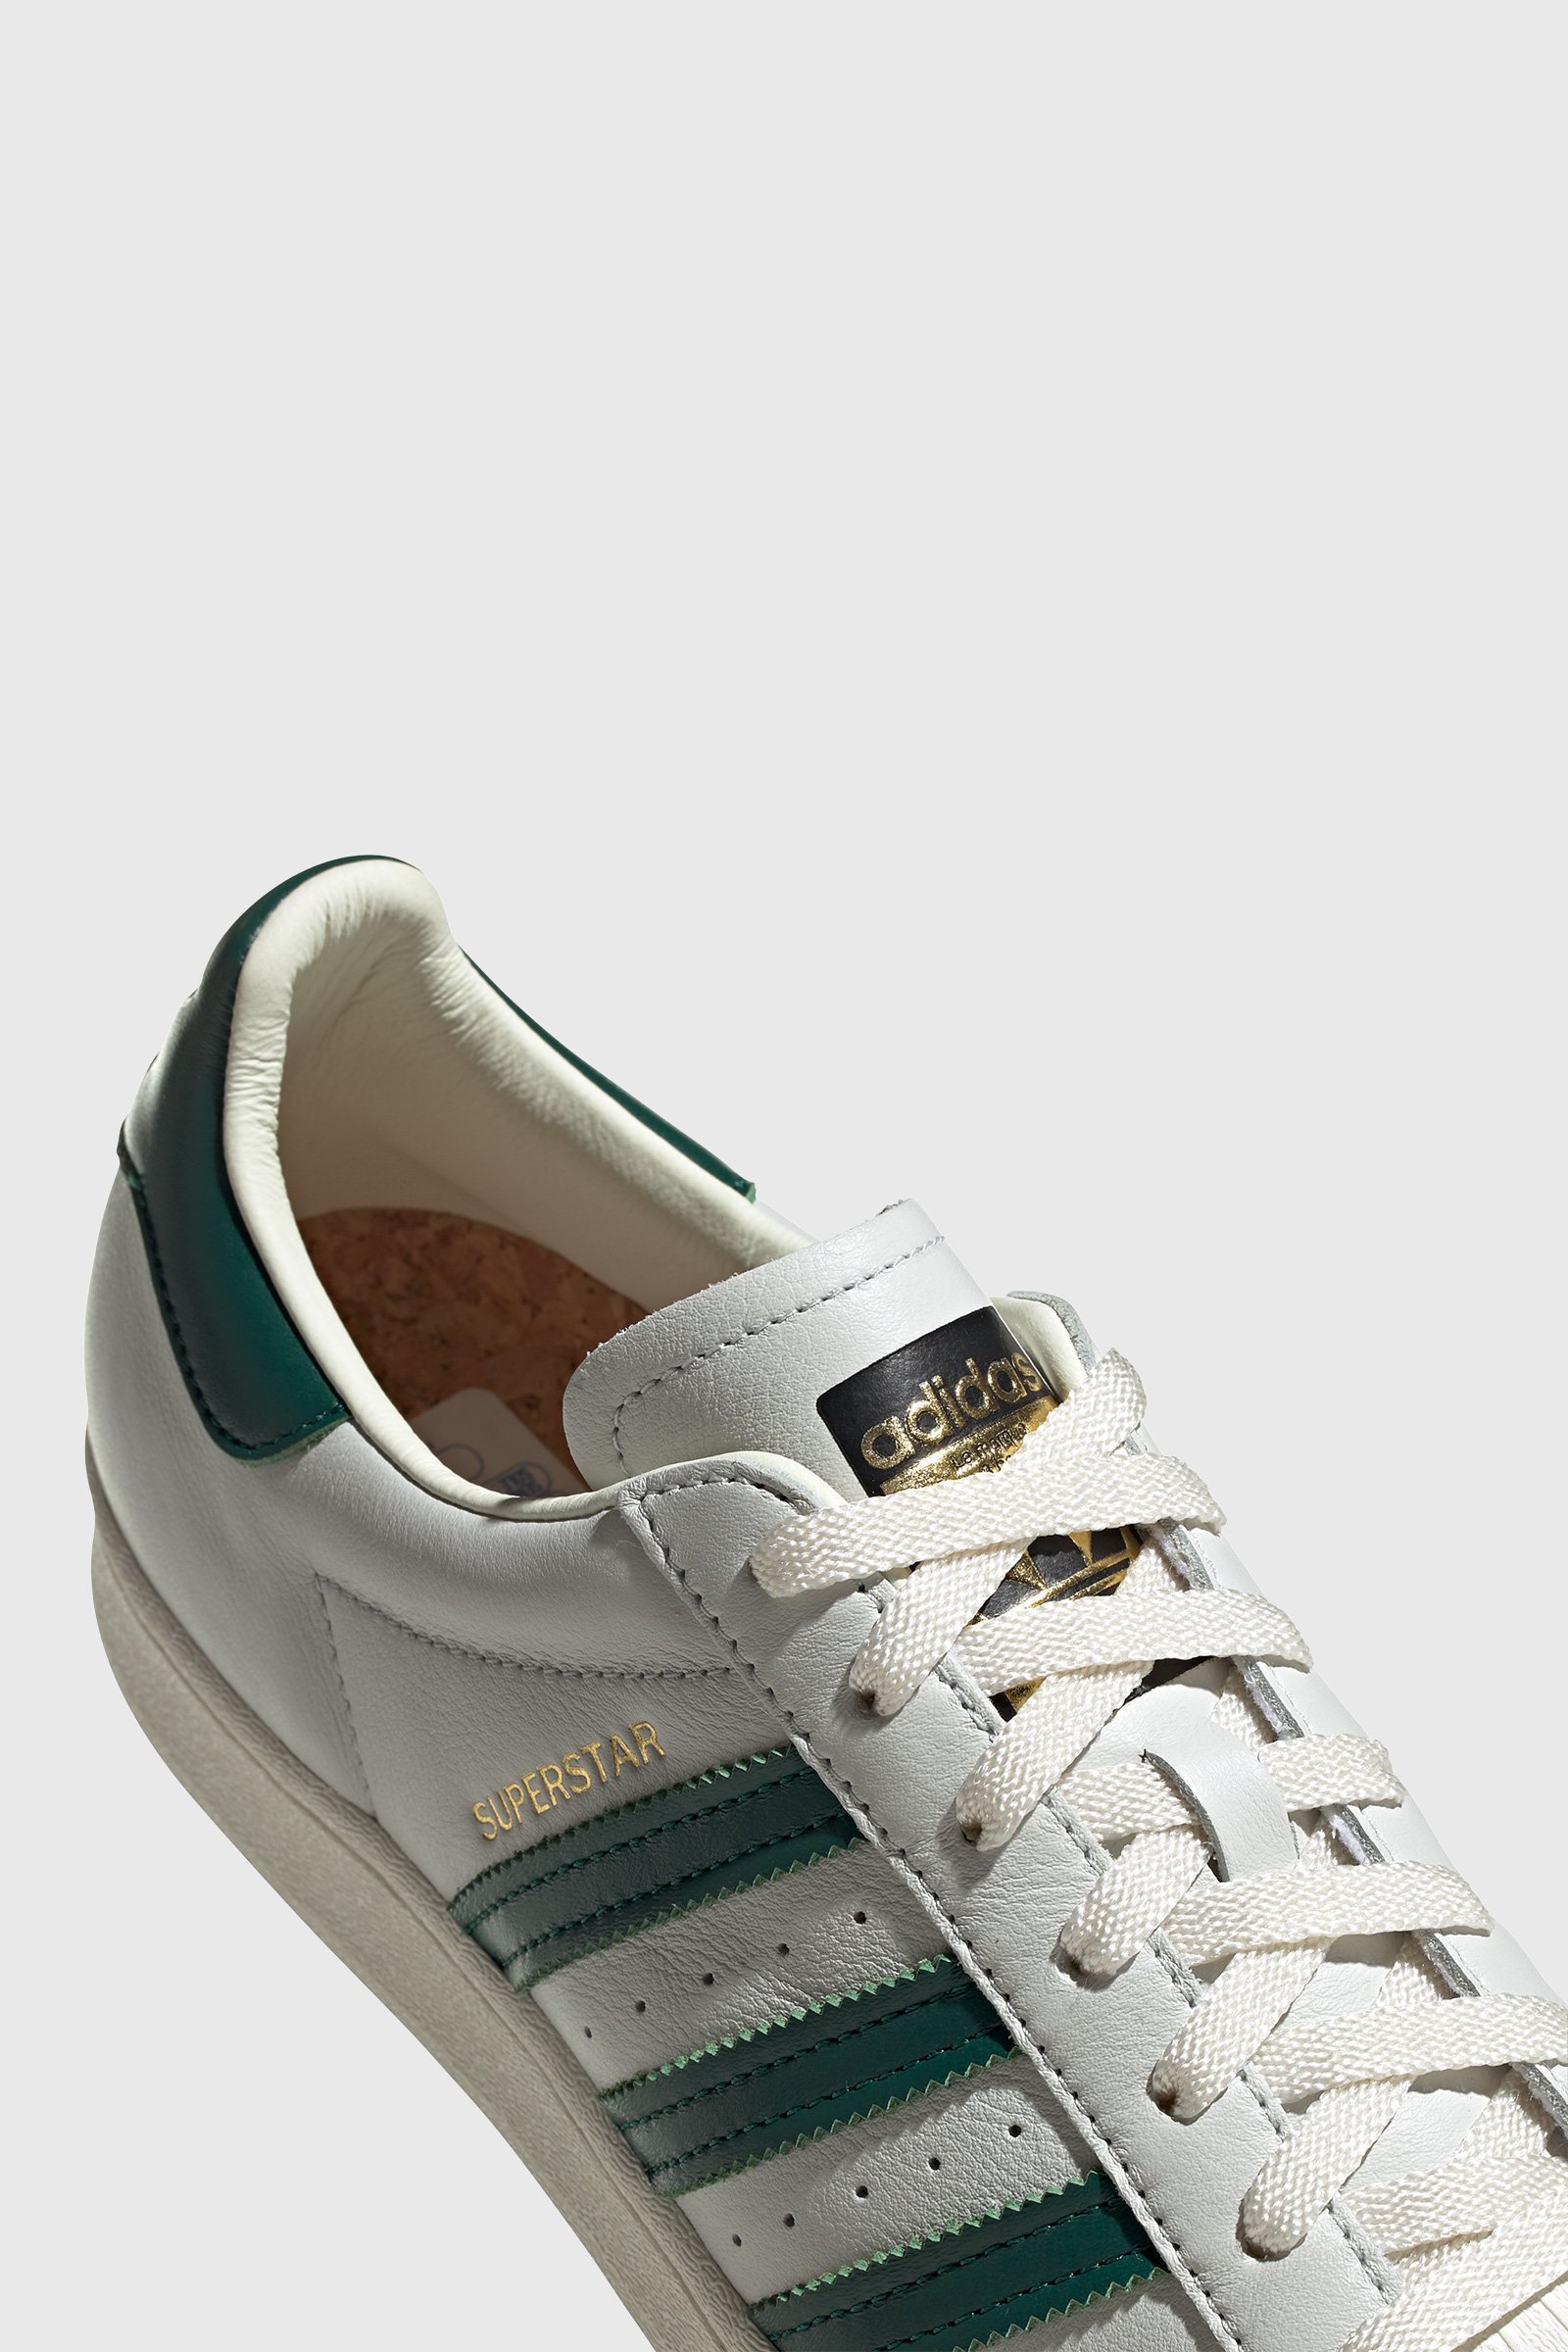 adidas Superstar Off white/college green | WoodWood.com